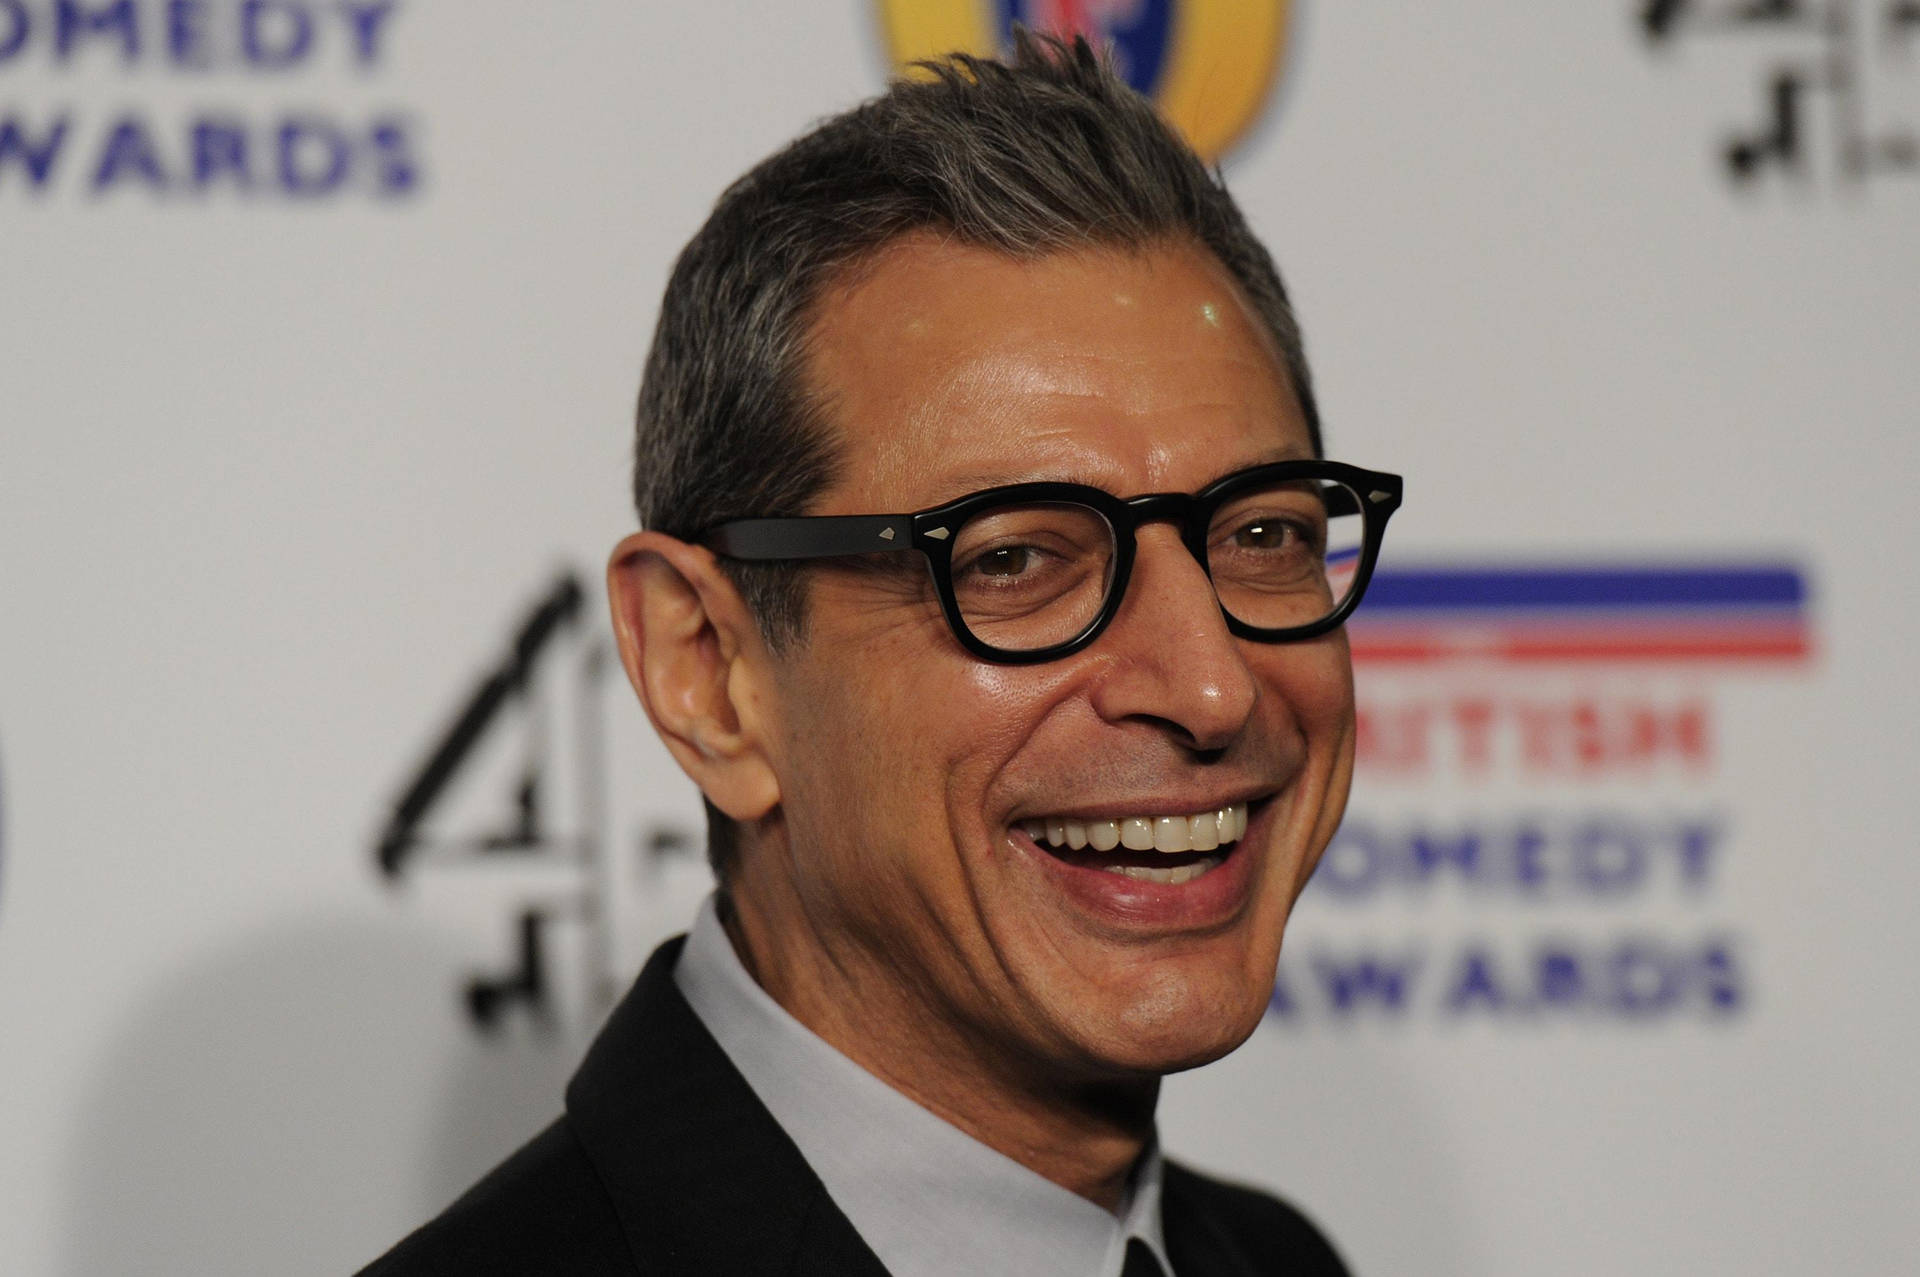 Jeffgoldblum På British Comedy Awards. (note: This Translation Does Not Specifically Reference Computer Or Mobile Wallpaper, But Provides A Direct Translation Of The Original Sentence.) Wallpaper